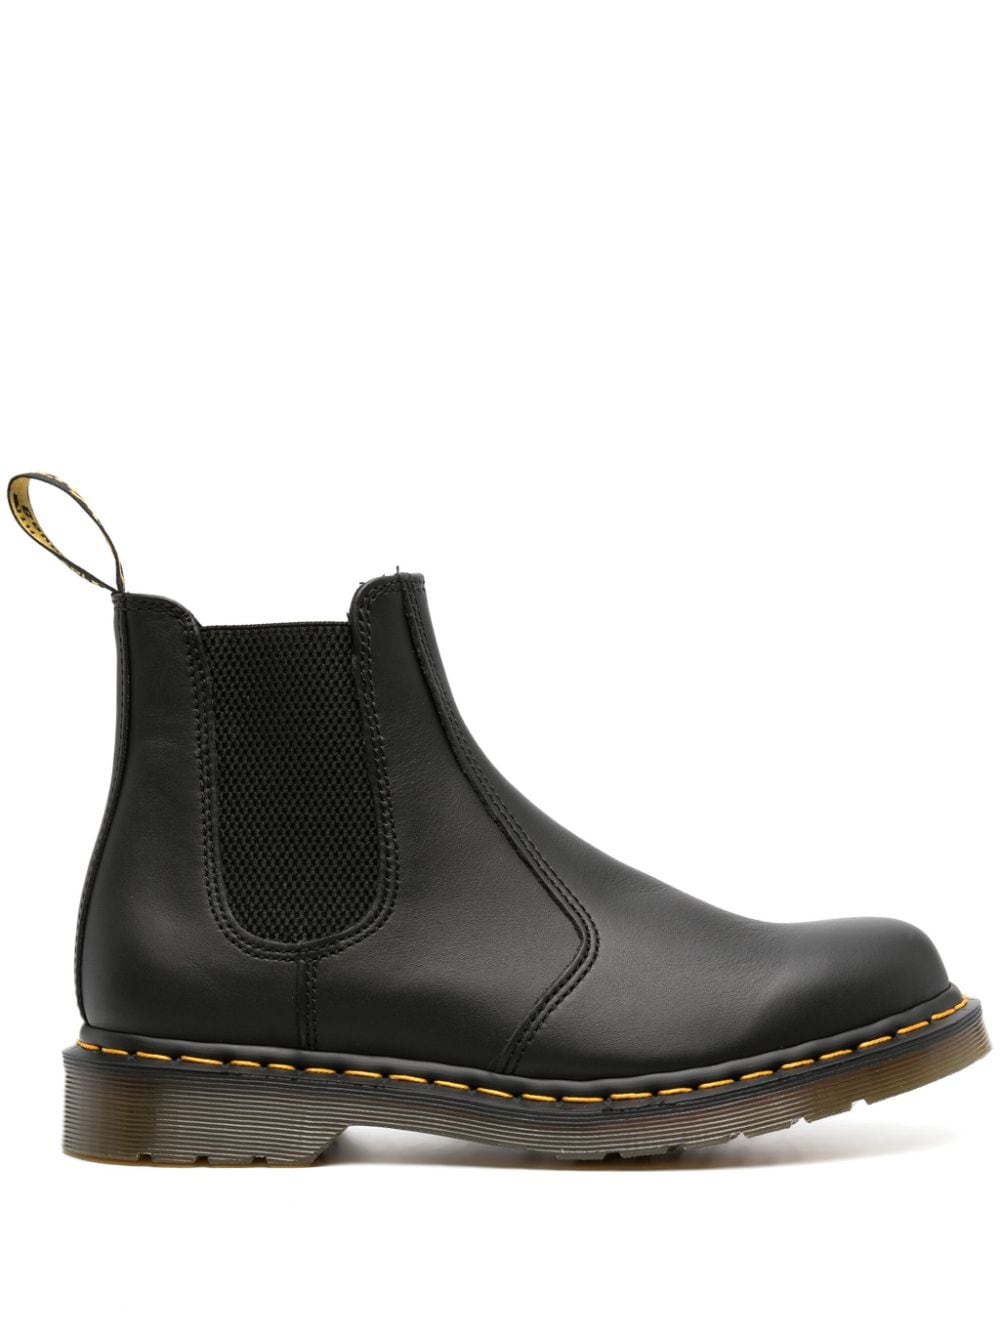 Image 1 of Dr. Martens 2976 Chelsea leather boots